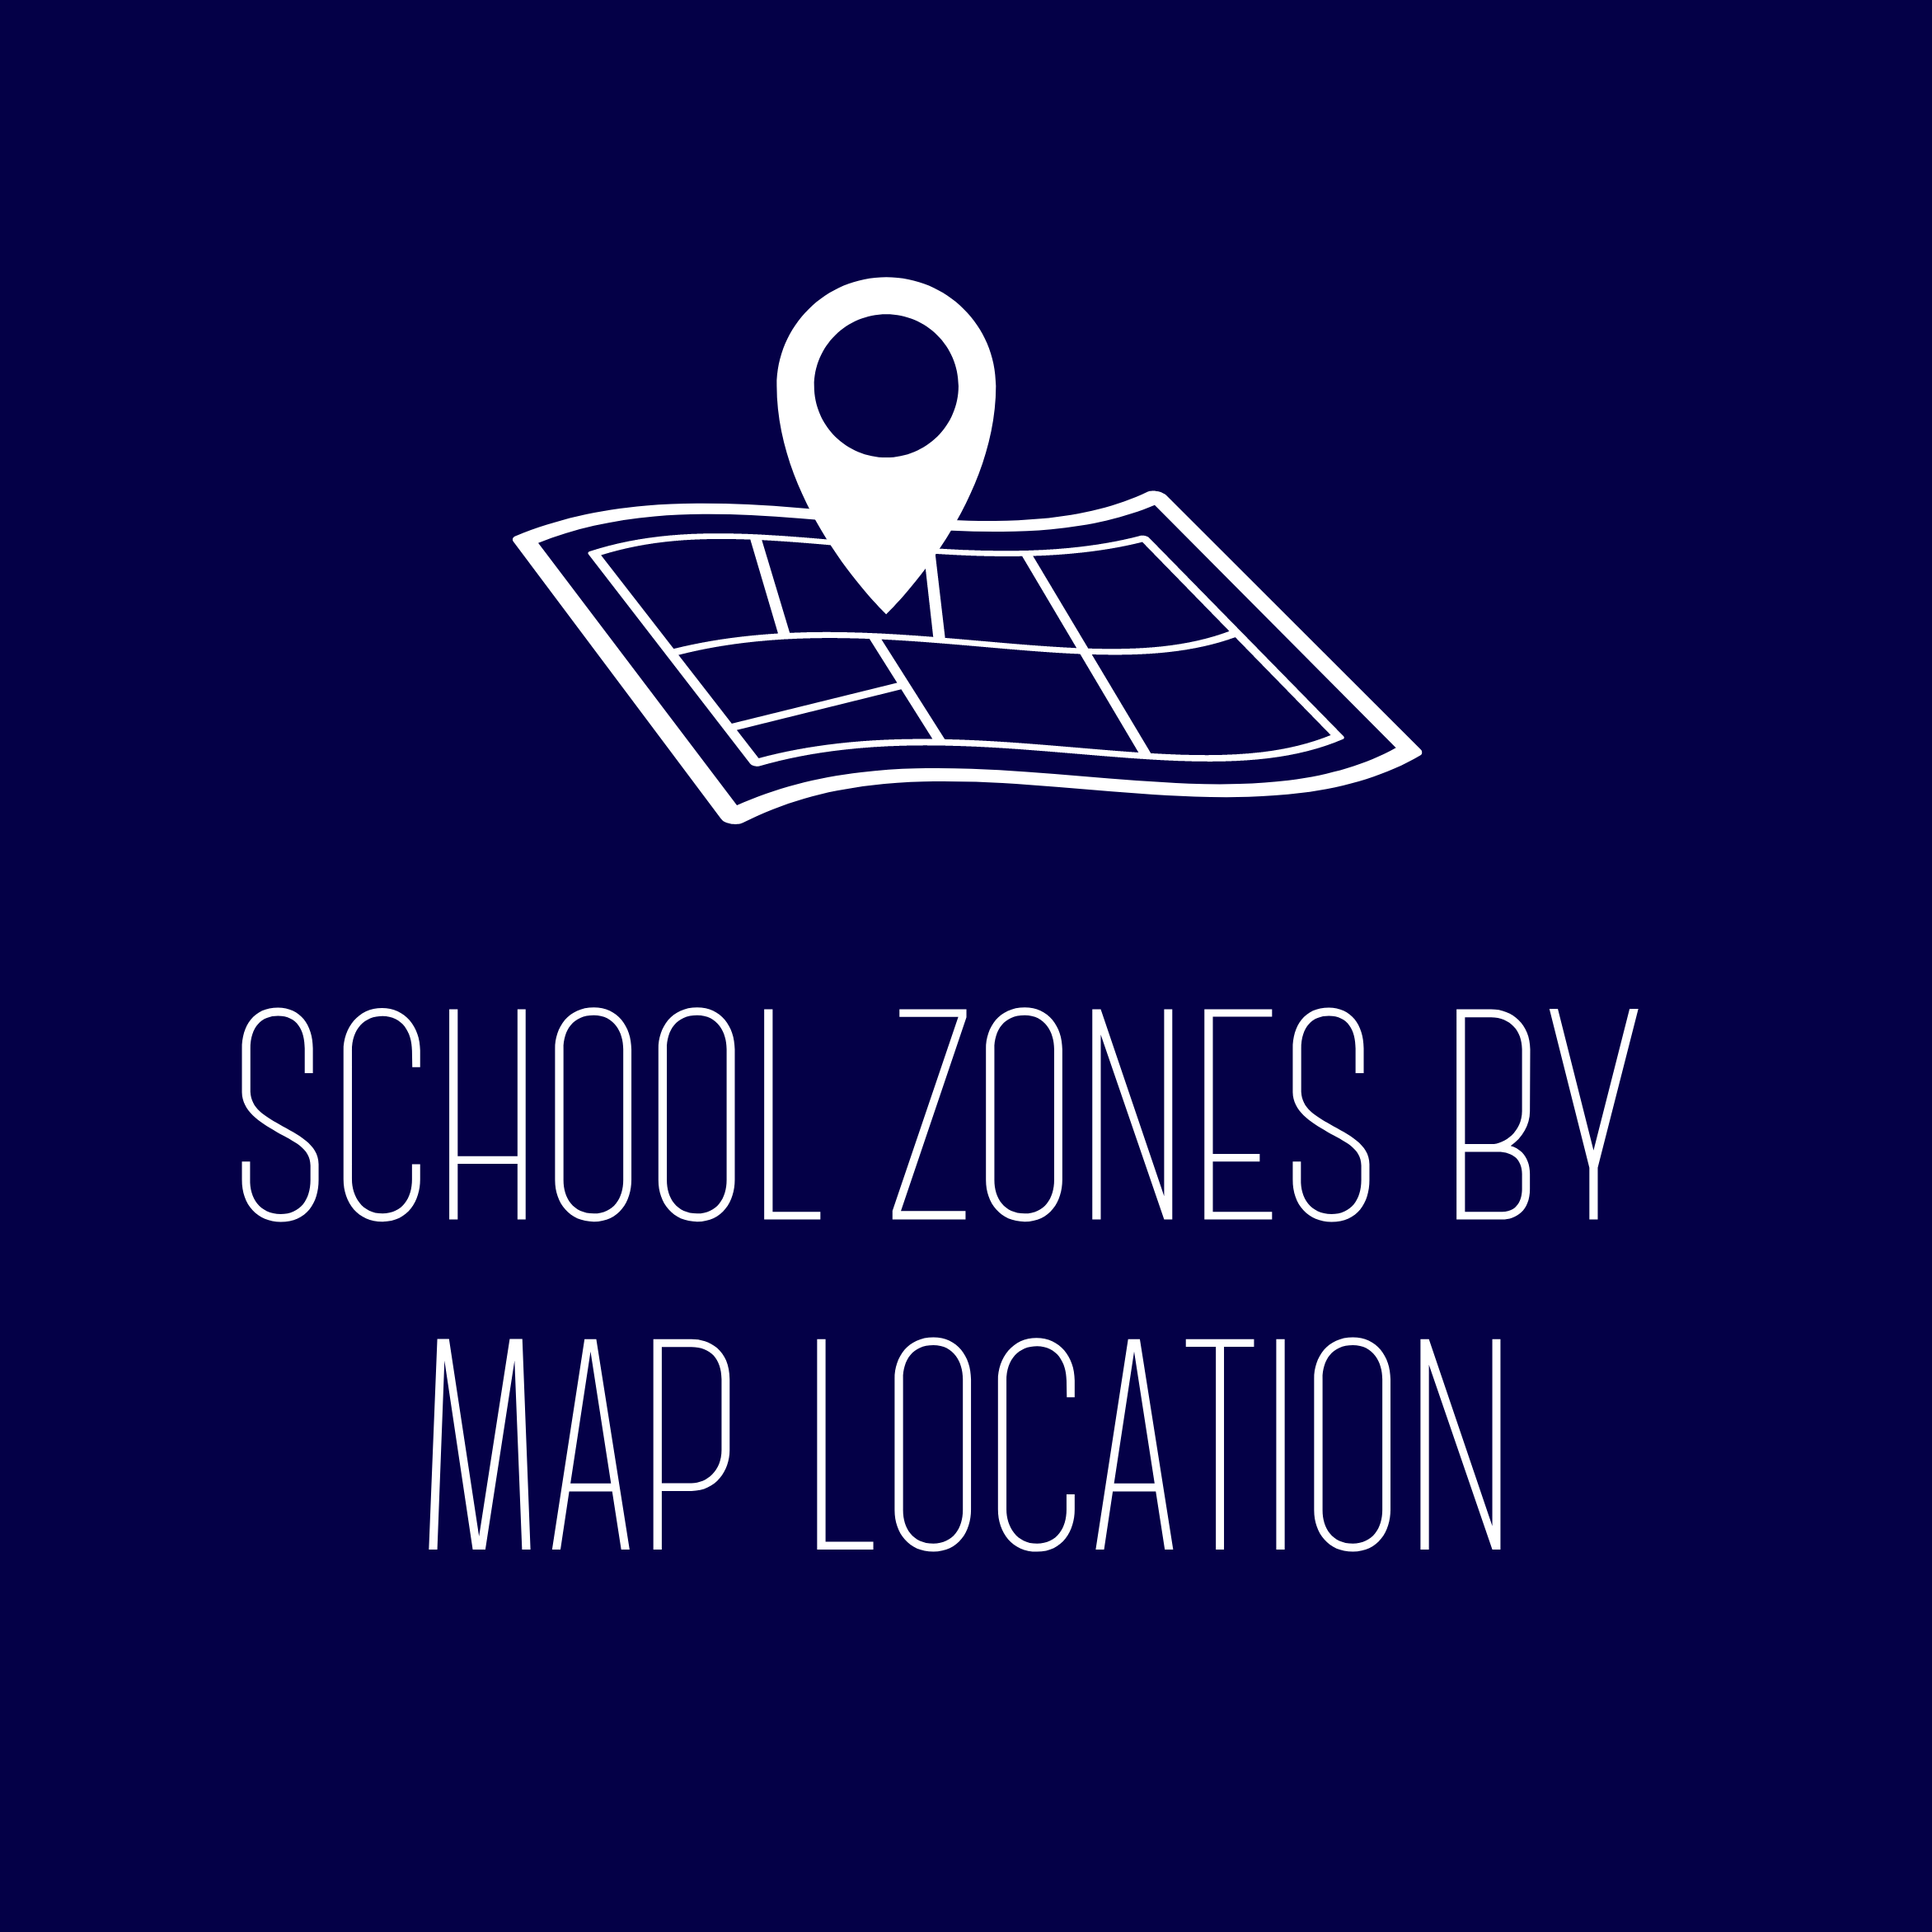 Zones by Map Location